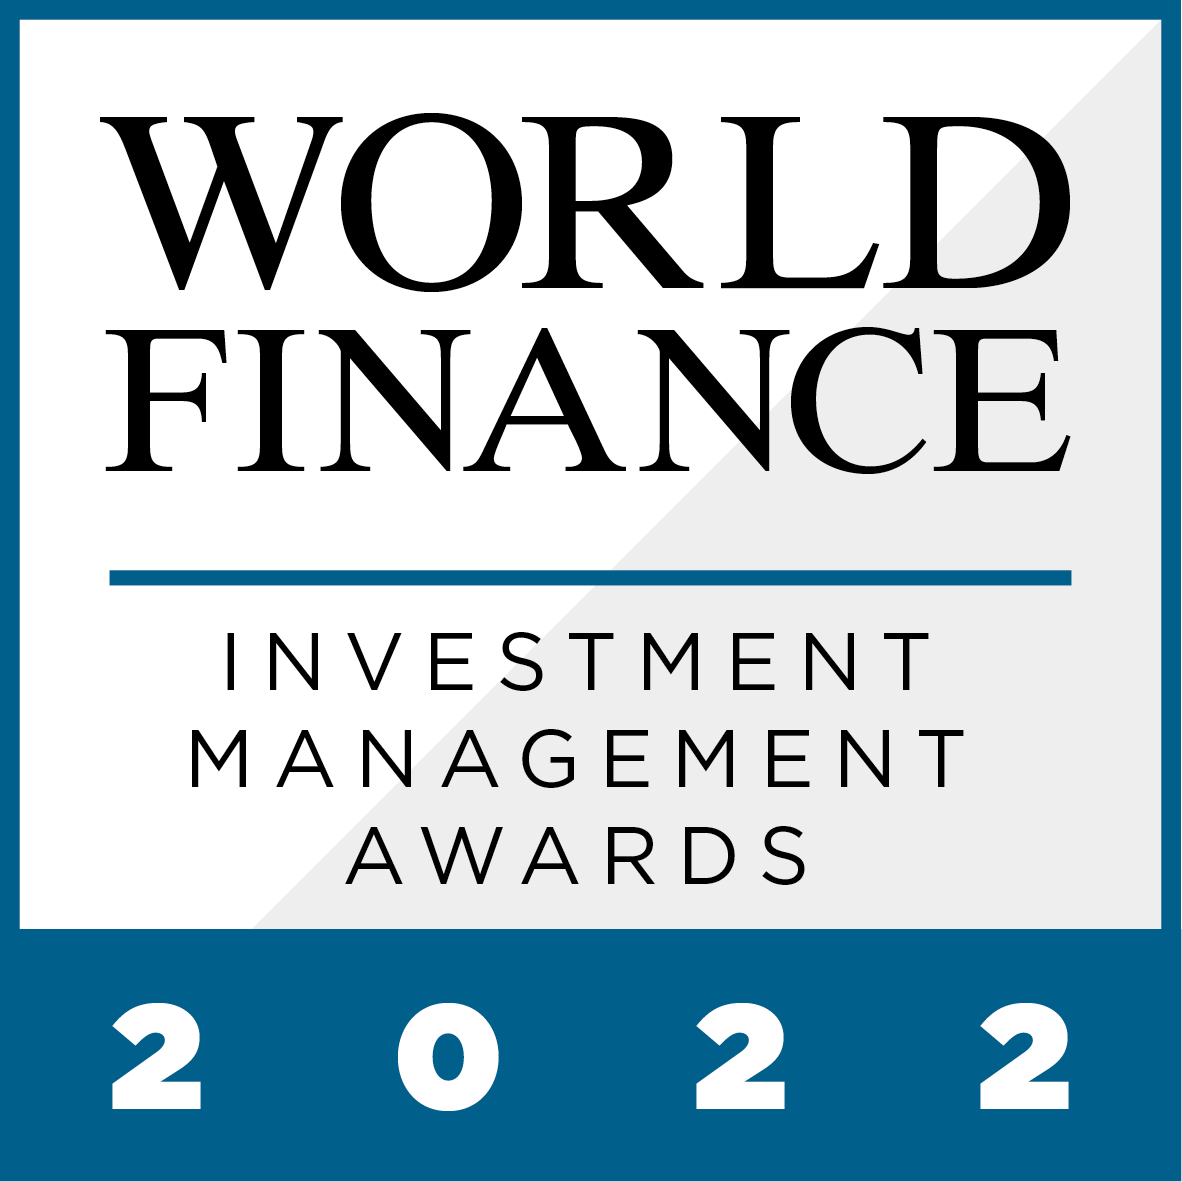 Please see below the full list of the Investment Management Awards 2022, as awarded by World Finance magazine